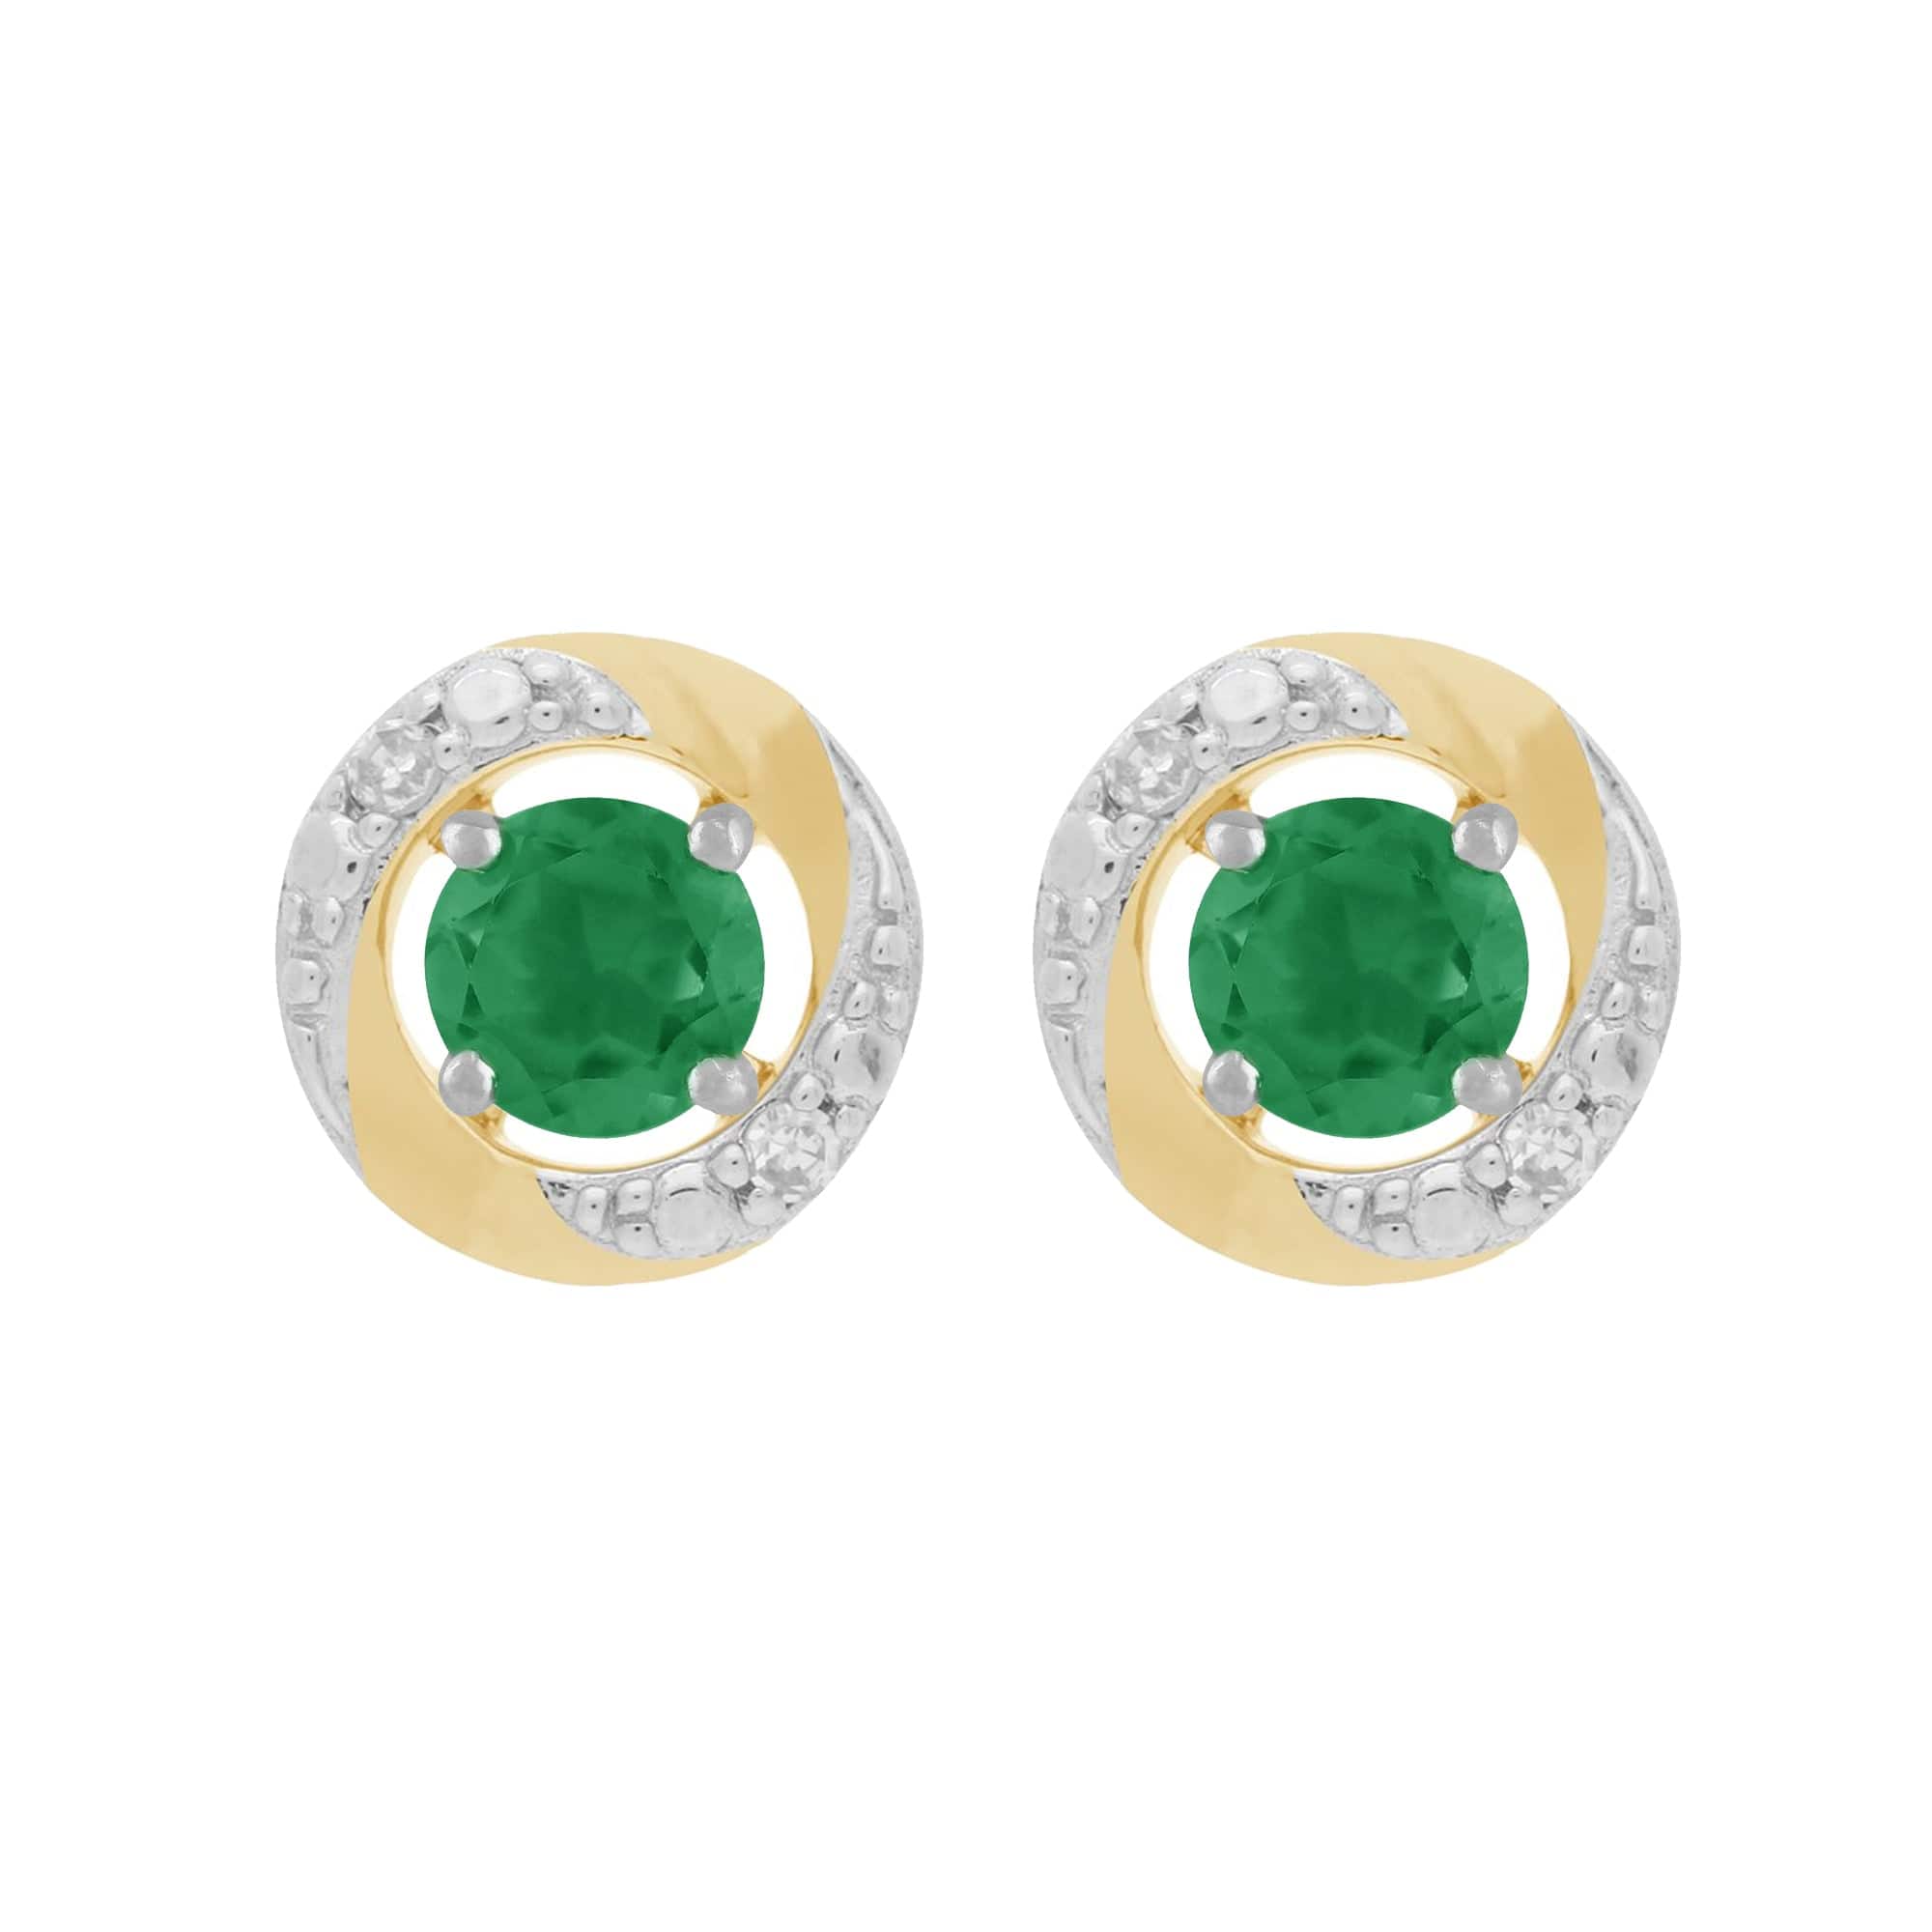 11621-191E0374019 9ct White Gold Emerald Stud Earrings with Detachable Diamond Halo Ear Jacket in 9ct Yellow Gold 1